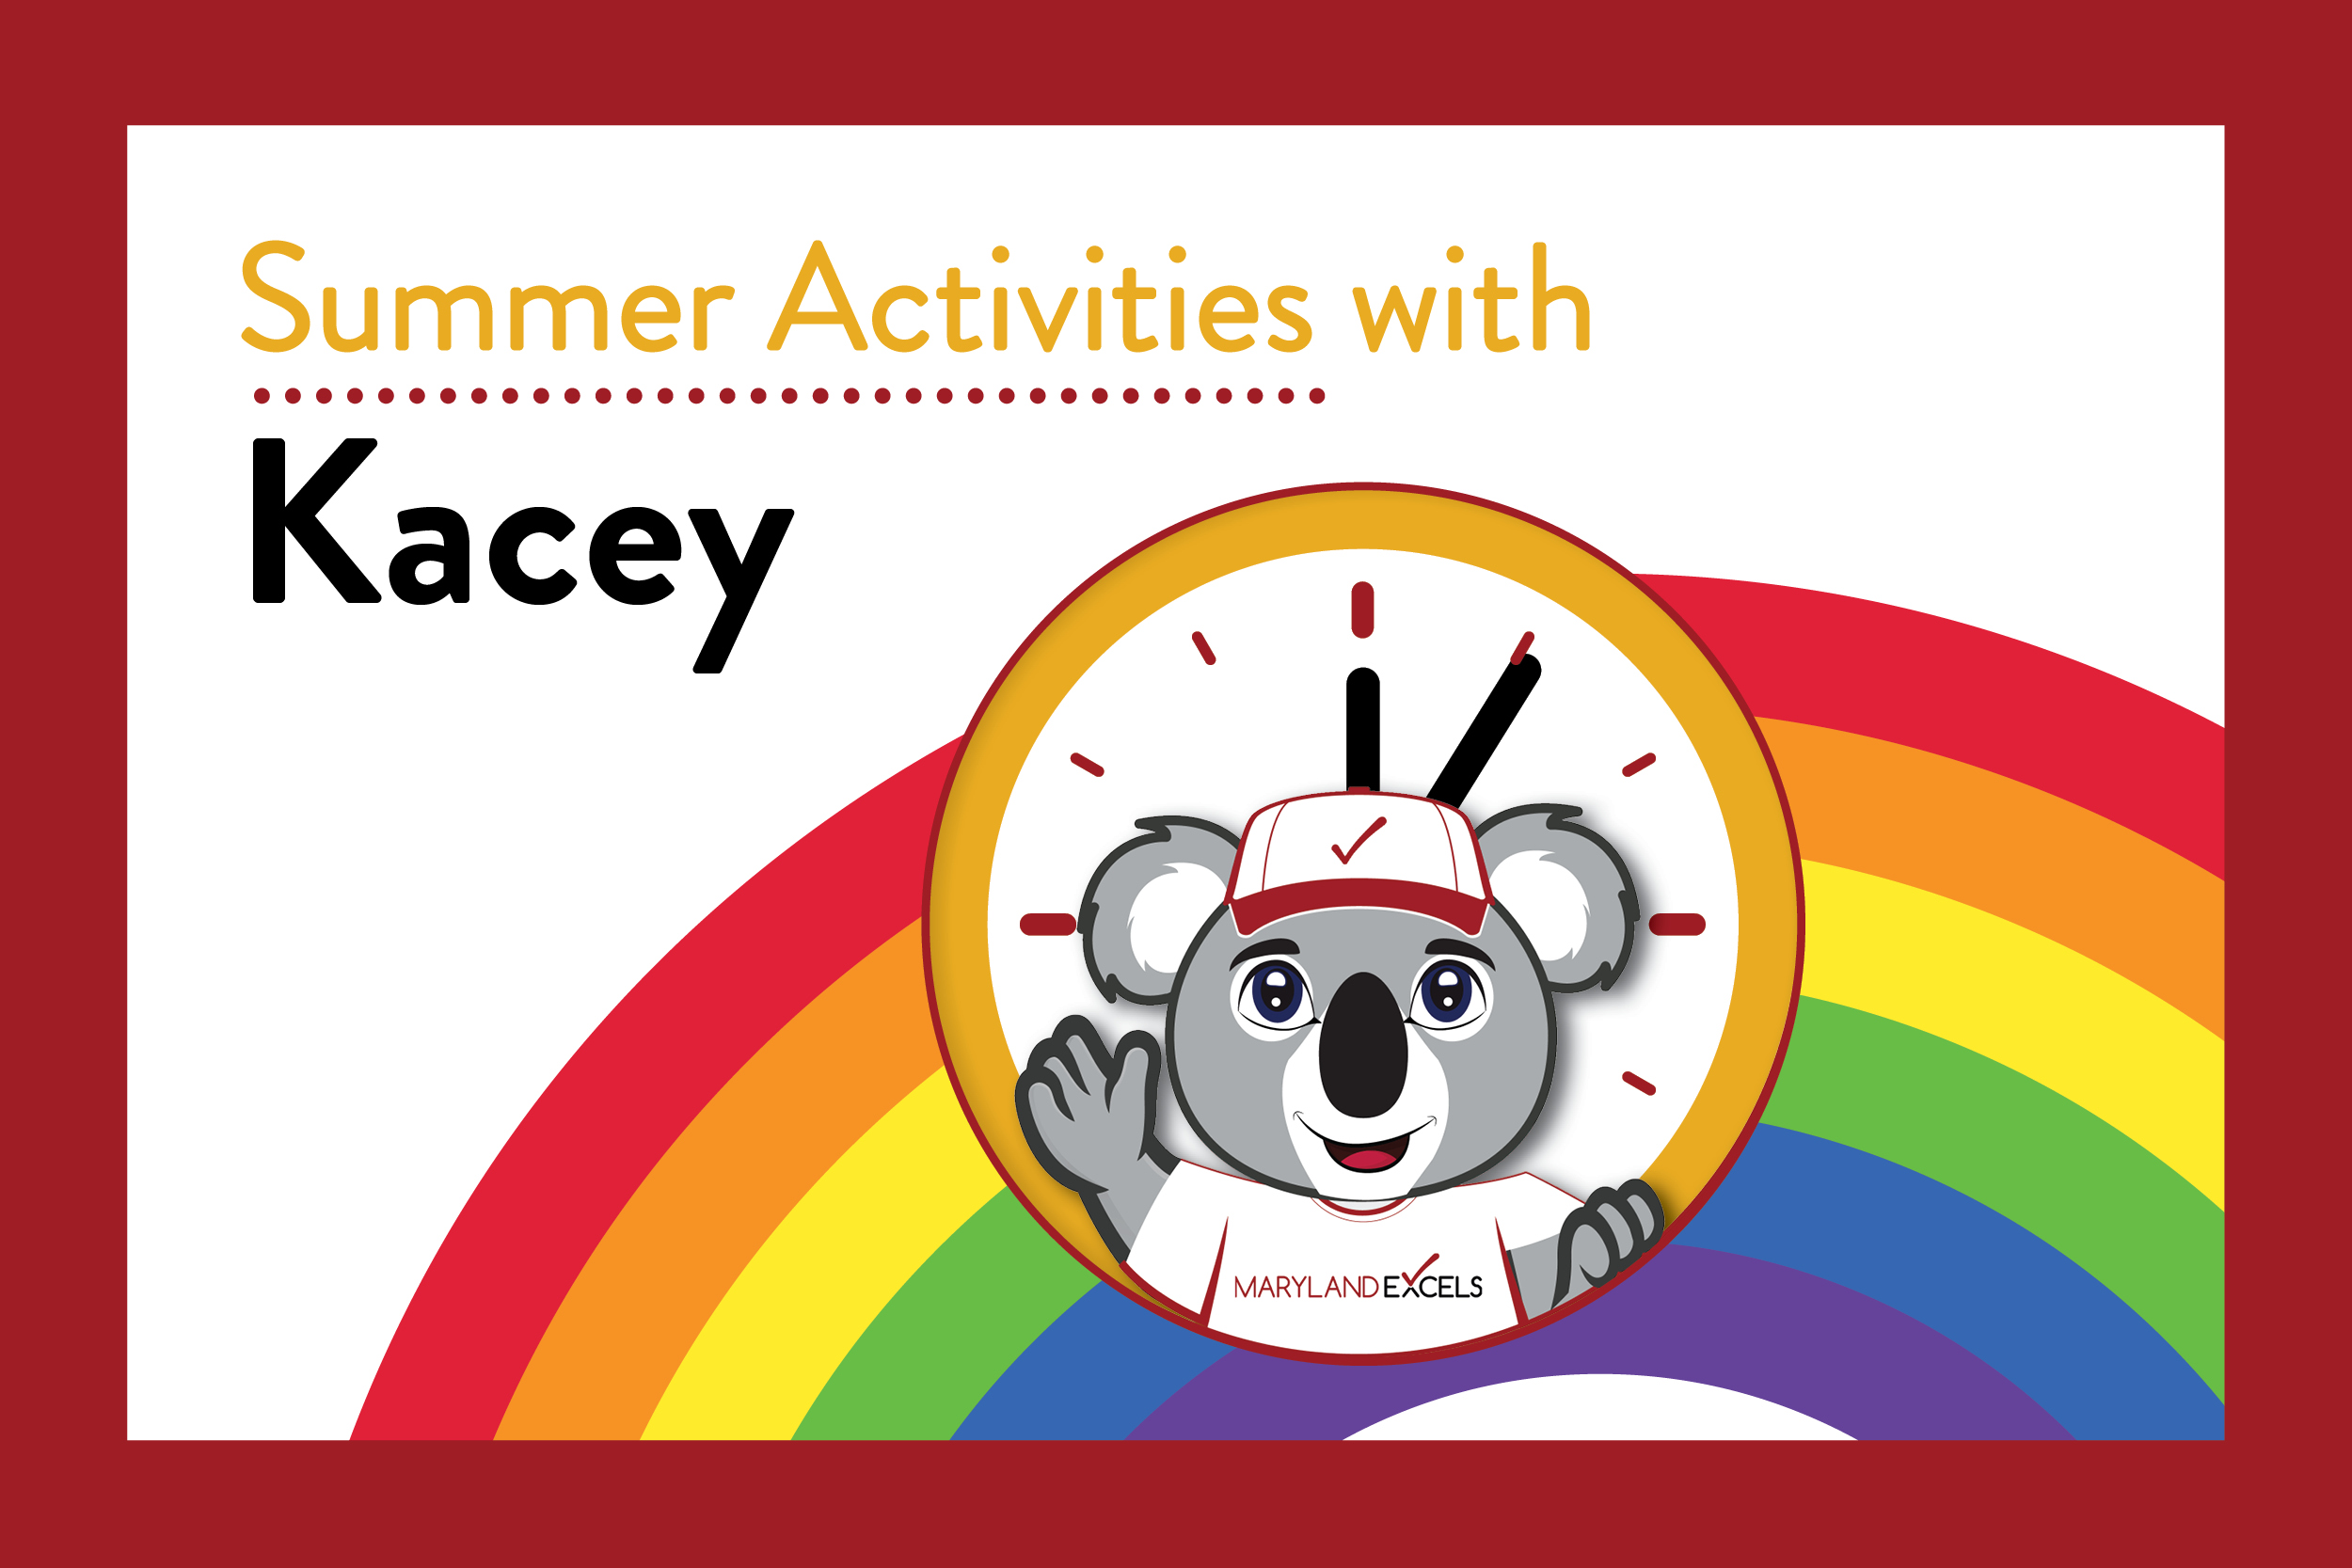 Summer Activities with Kacey